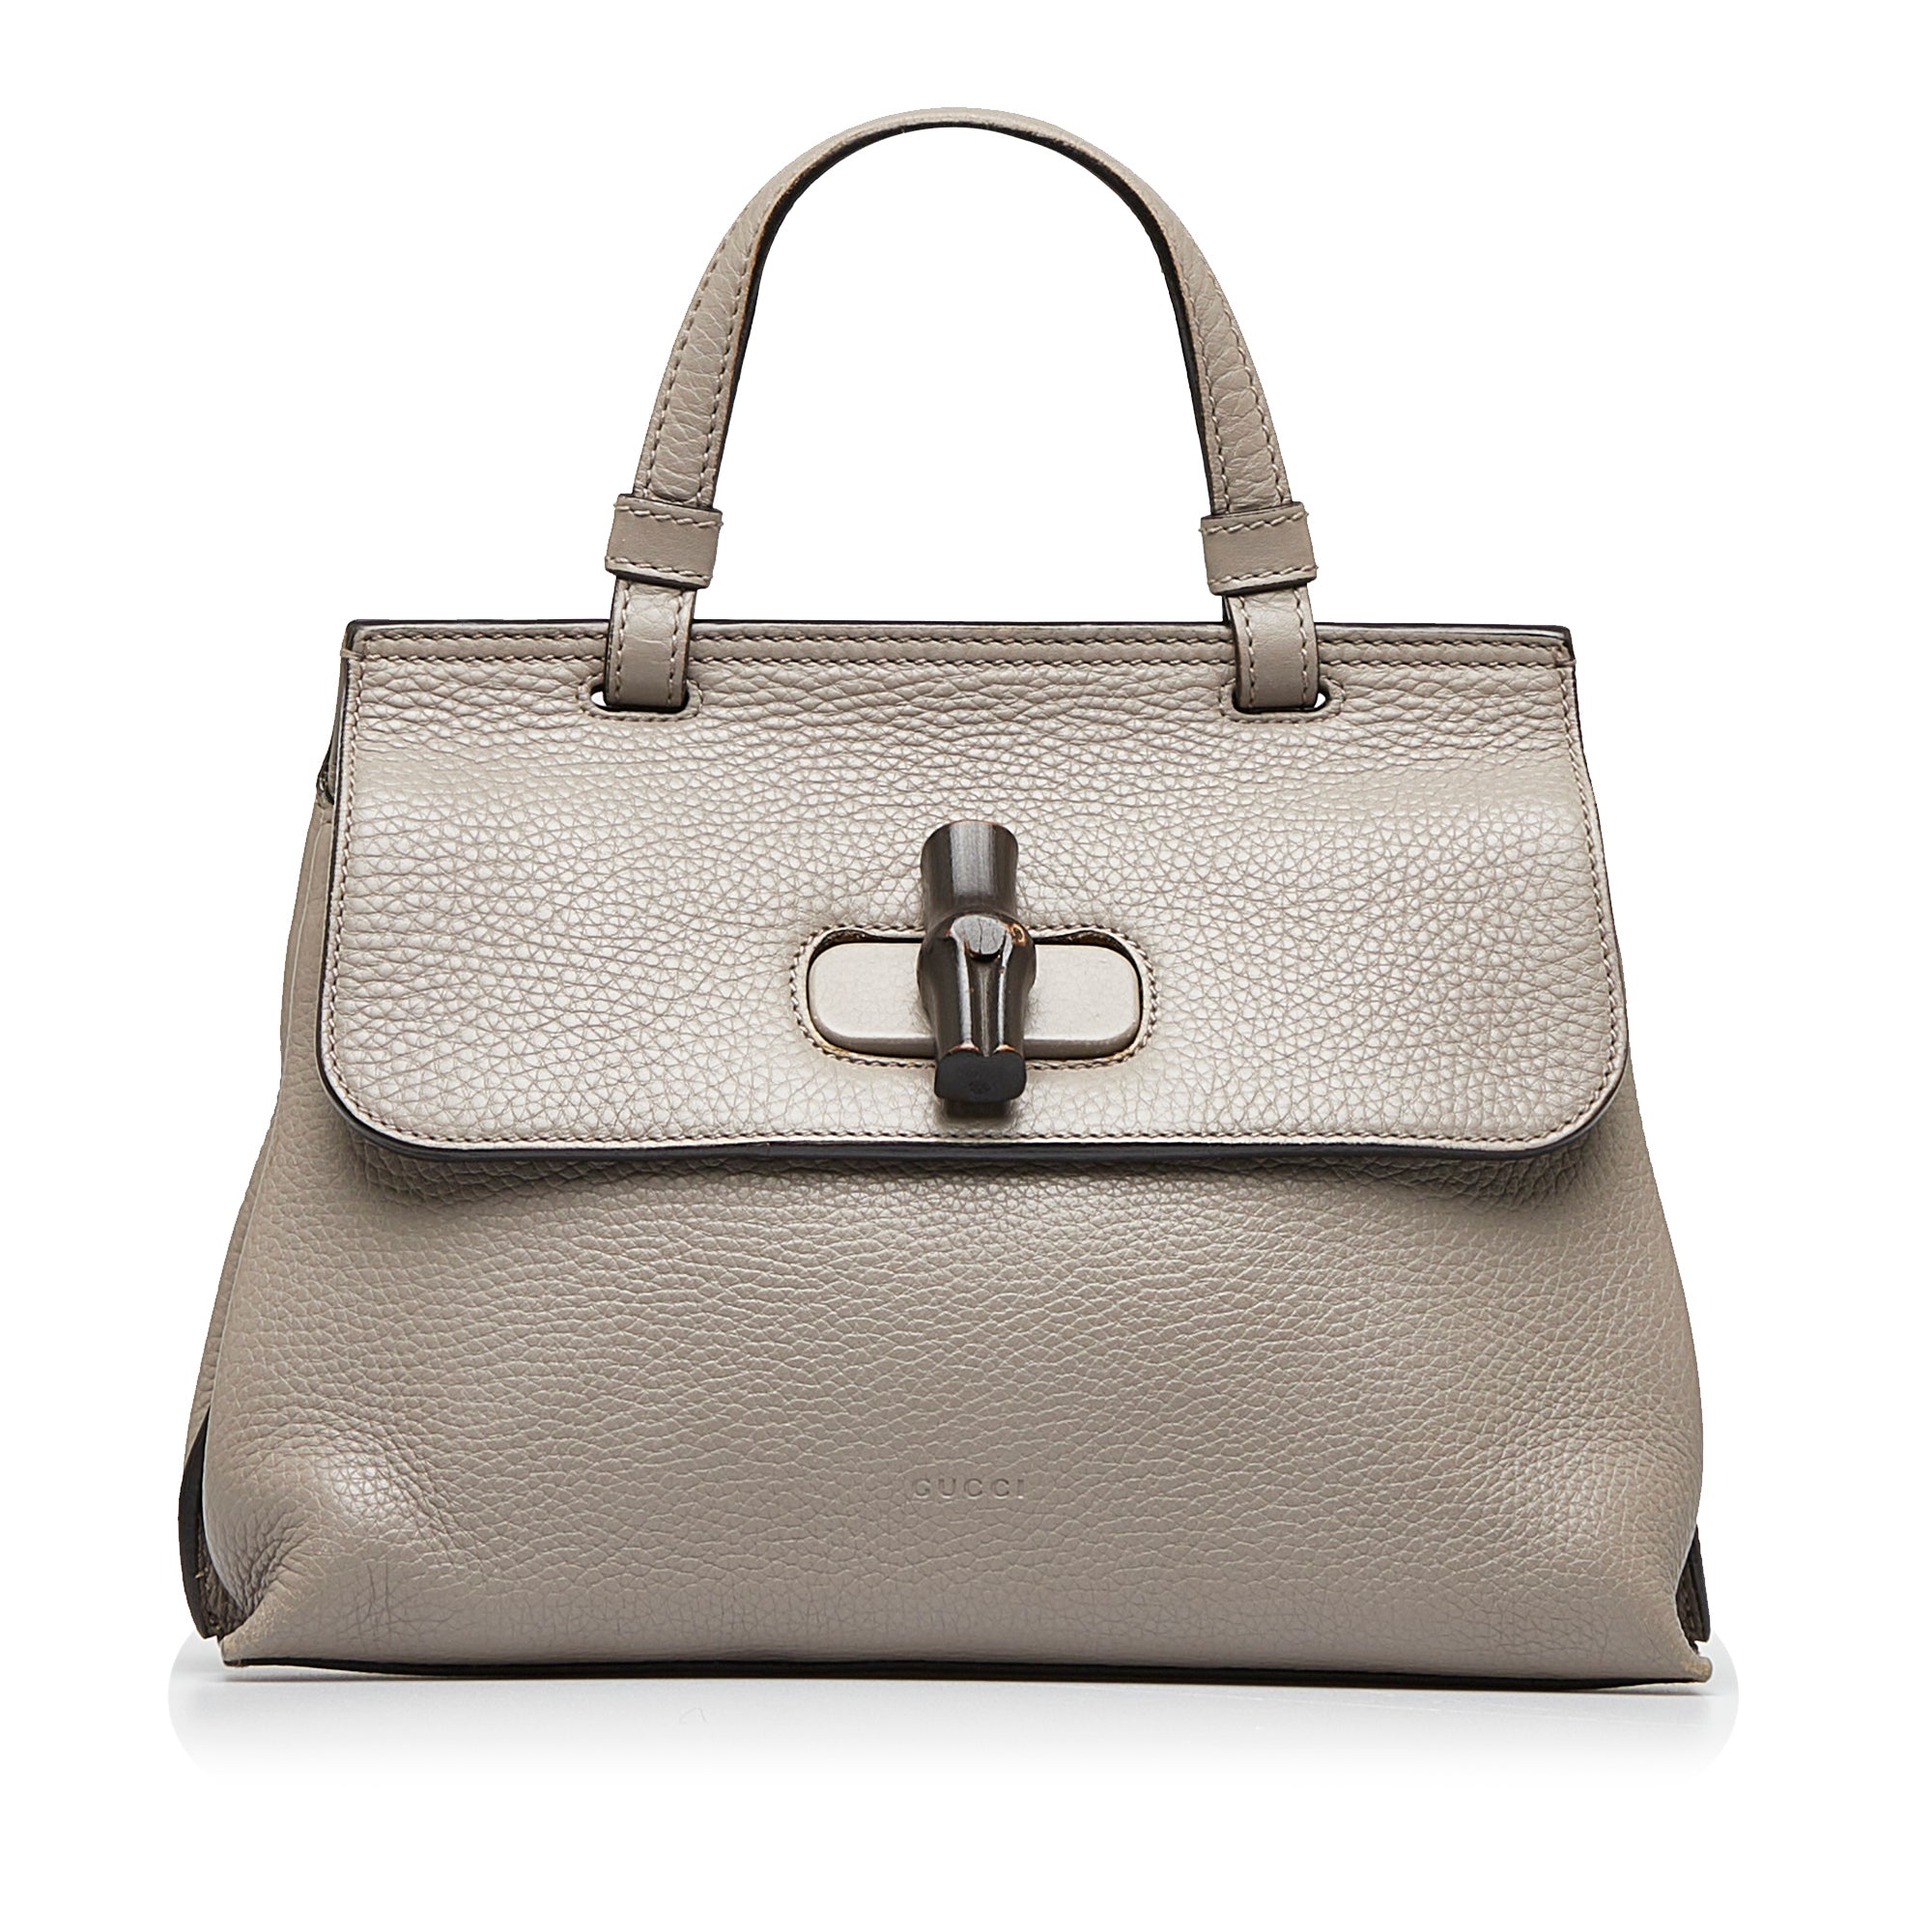 Gray Chanel Country Chic Satchel – Designer Revival